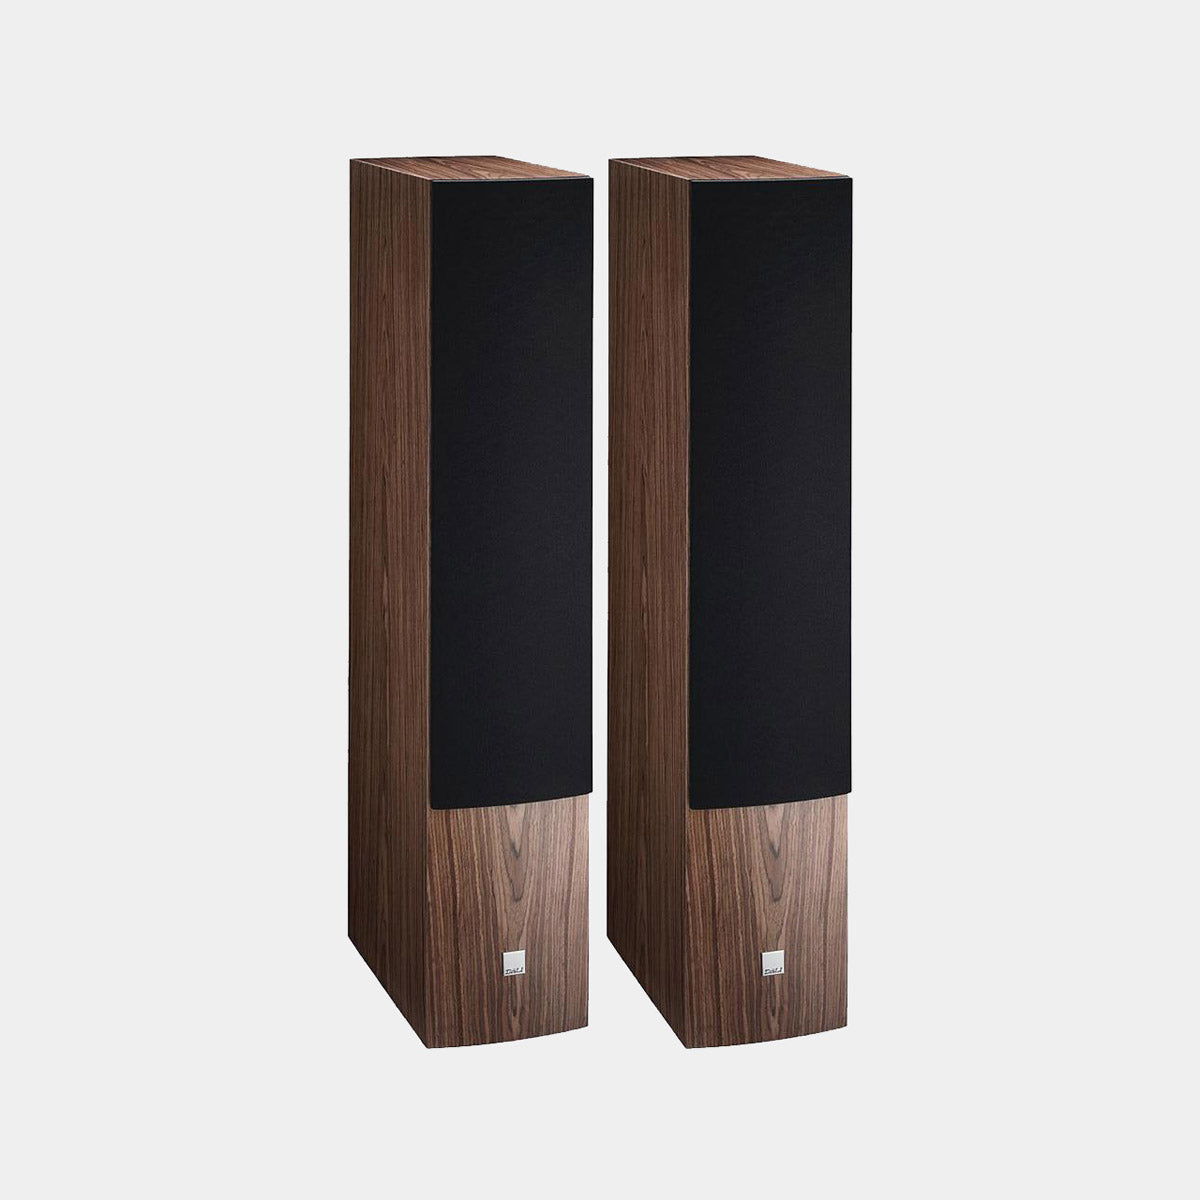 Wooden speakers with the covers on them